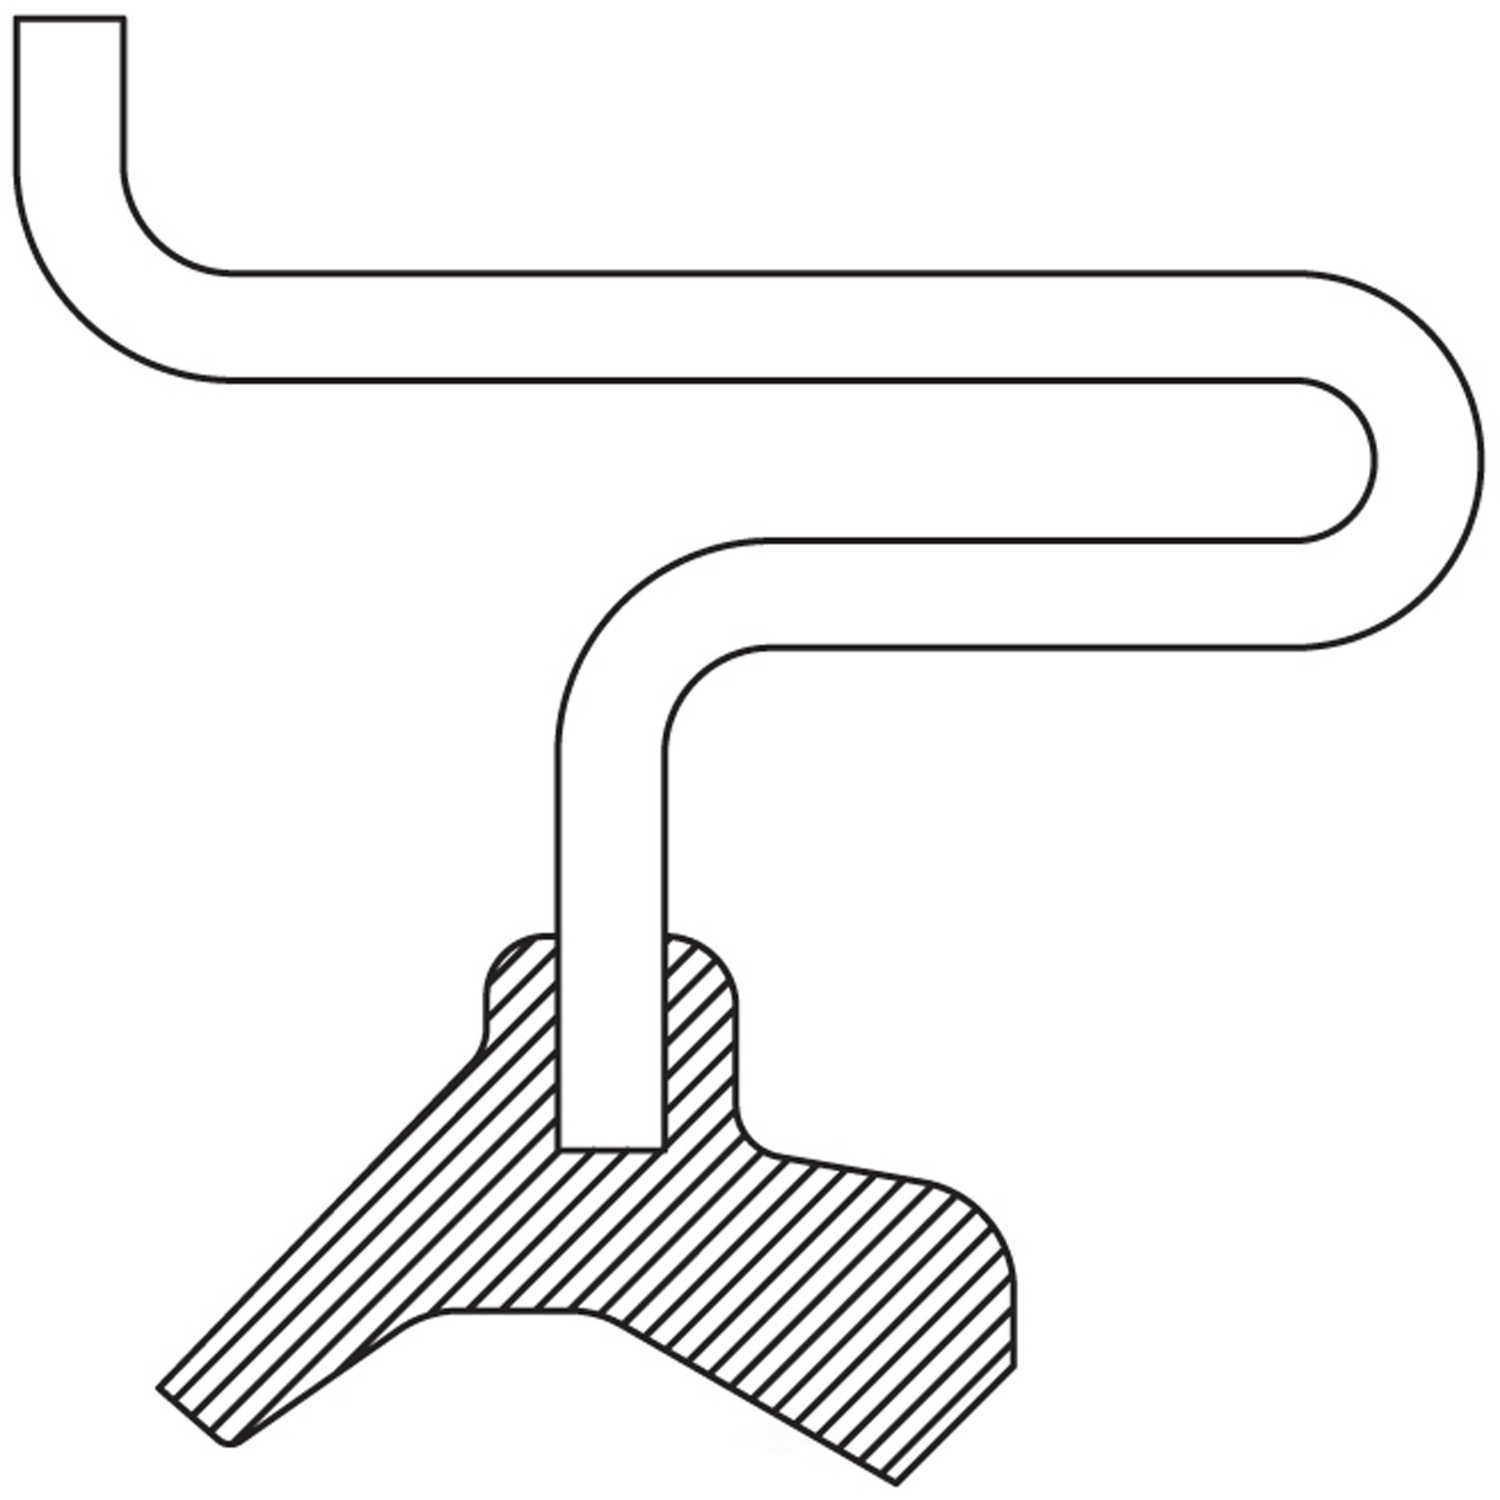 NATIONAL SEALS - Axle Spindle Seal - NAT 710701